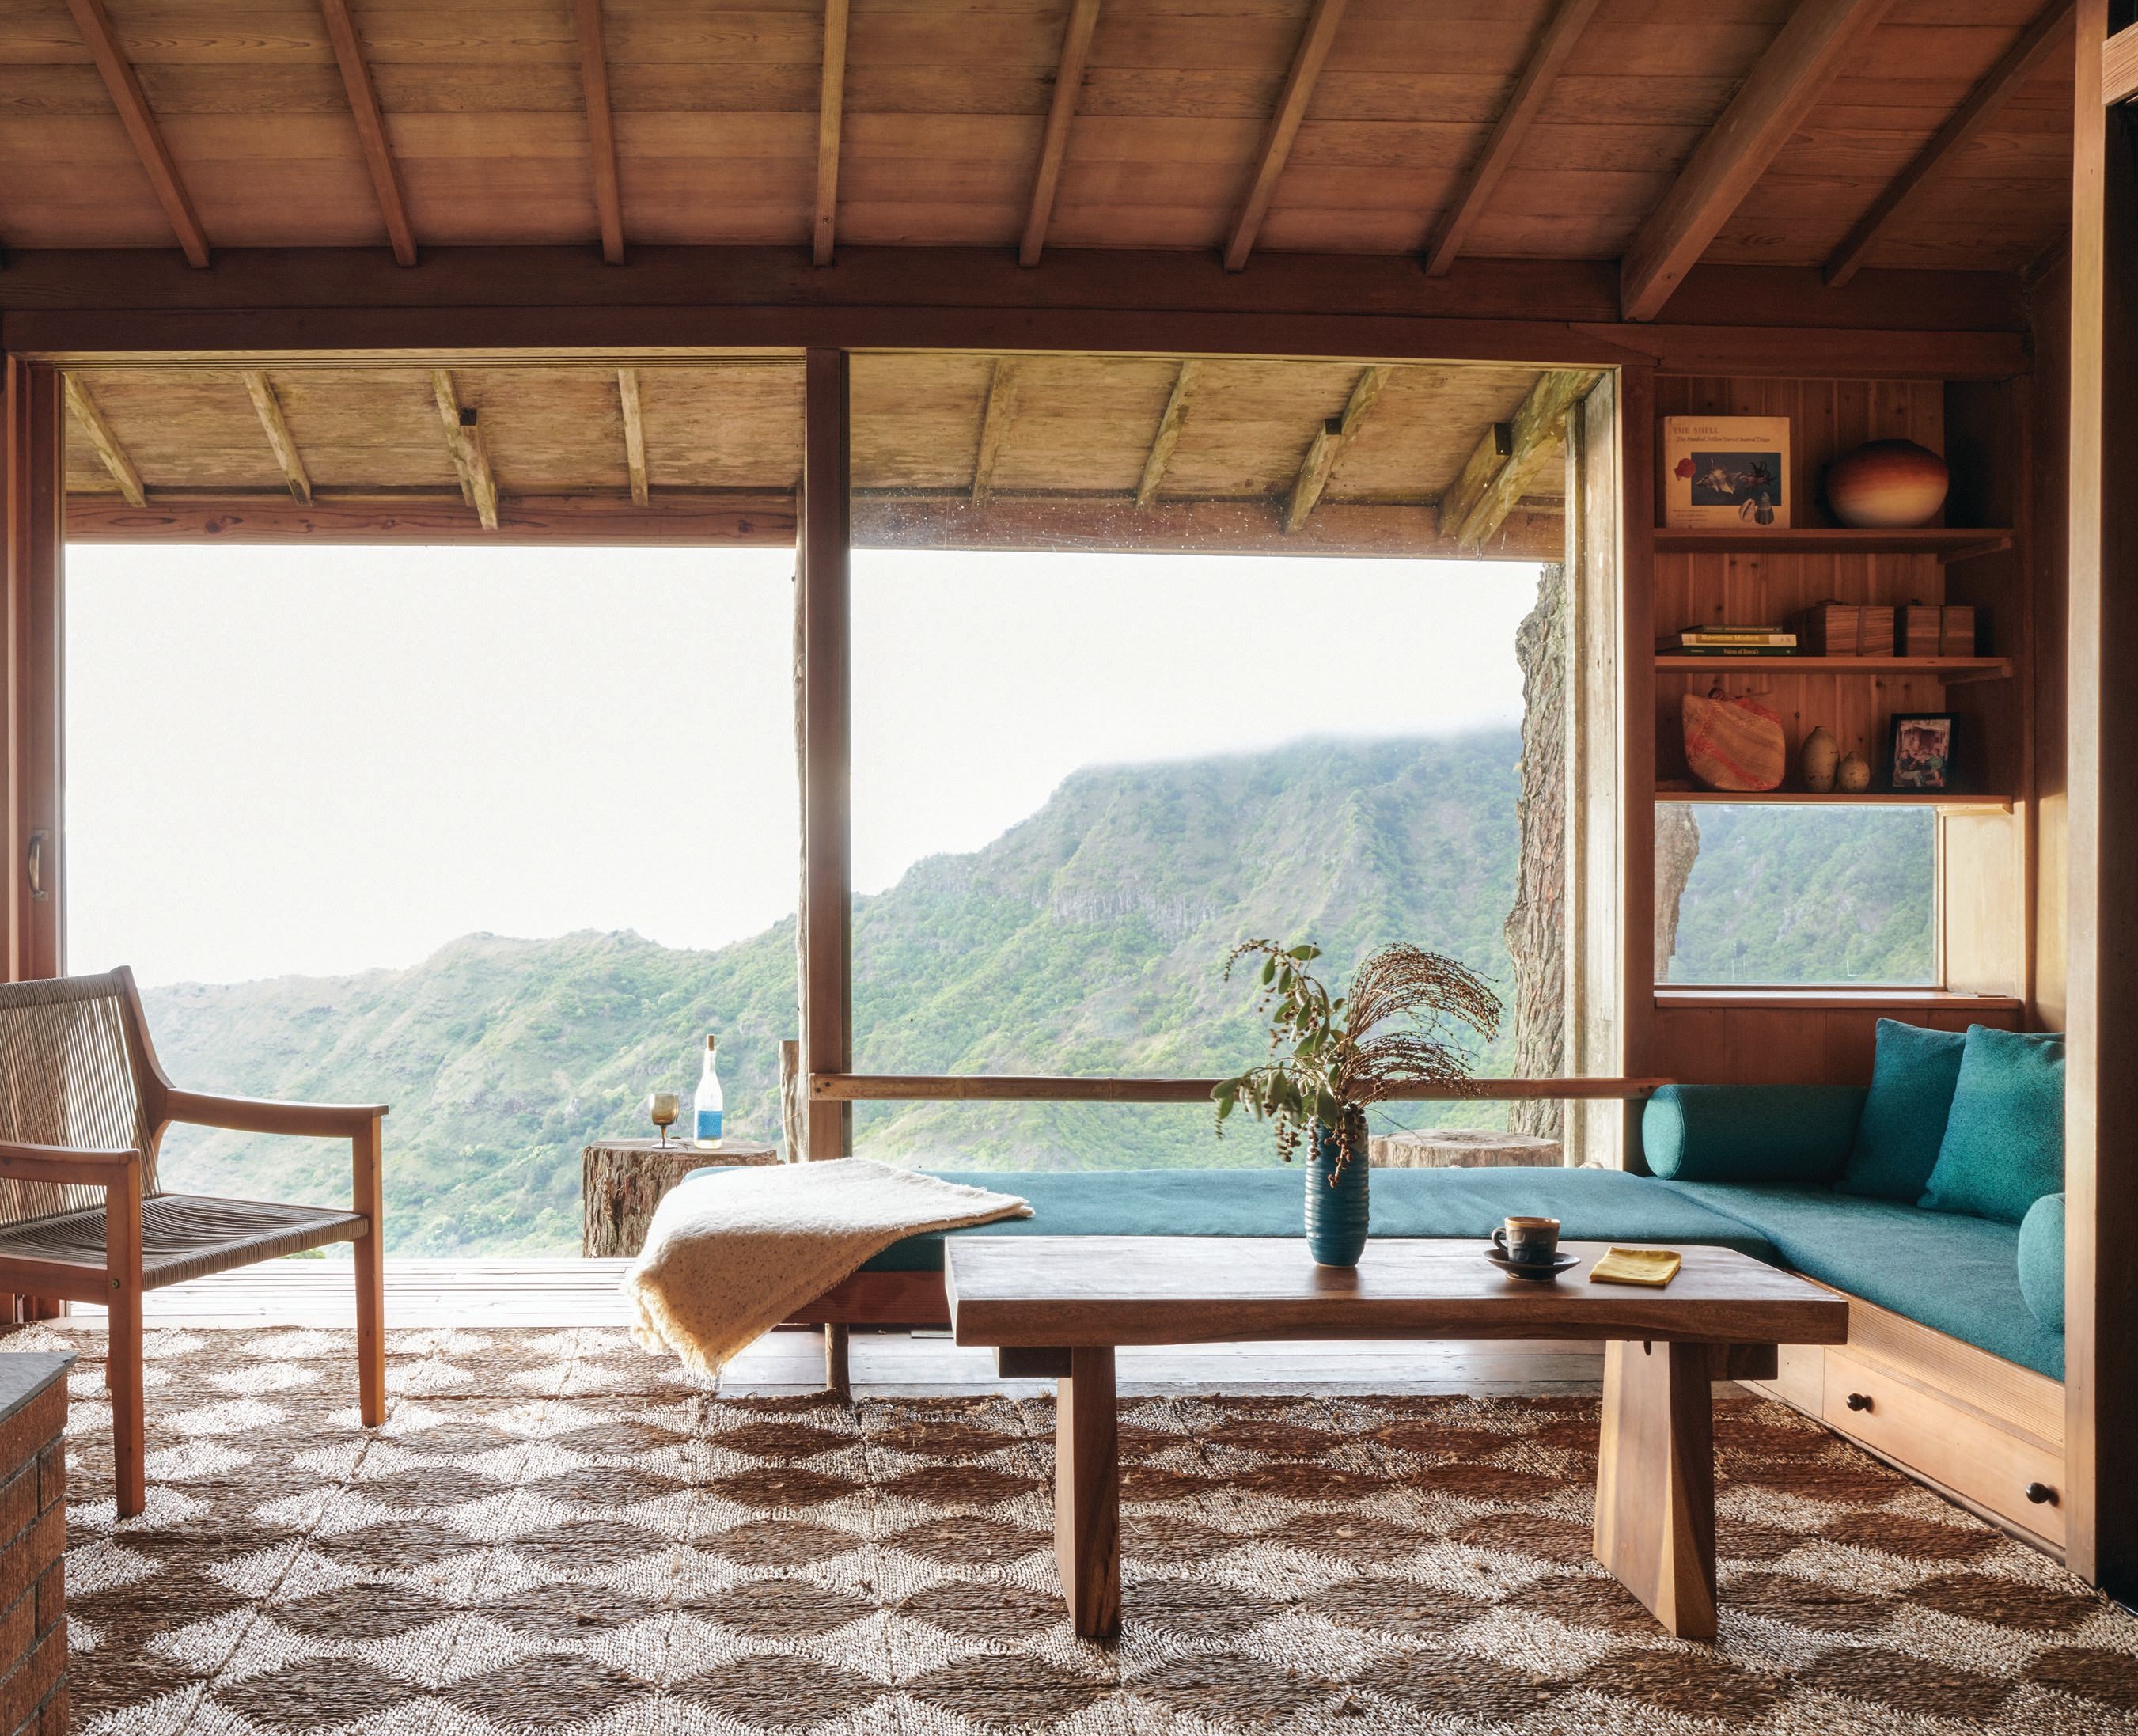 Vladimir Ossipoff typically brought his whole family along with his colleagues for the weekend to the Palehua cabin, which sits at an elevation of 2,500 feet in the Wai‘anae mountain range. Photographed by Paul Strouse Styled by Andrew Mau, Courtney Monahan and Roberta Oaks